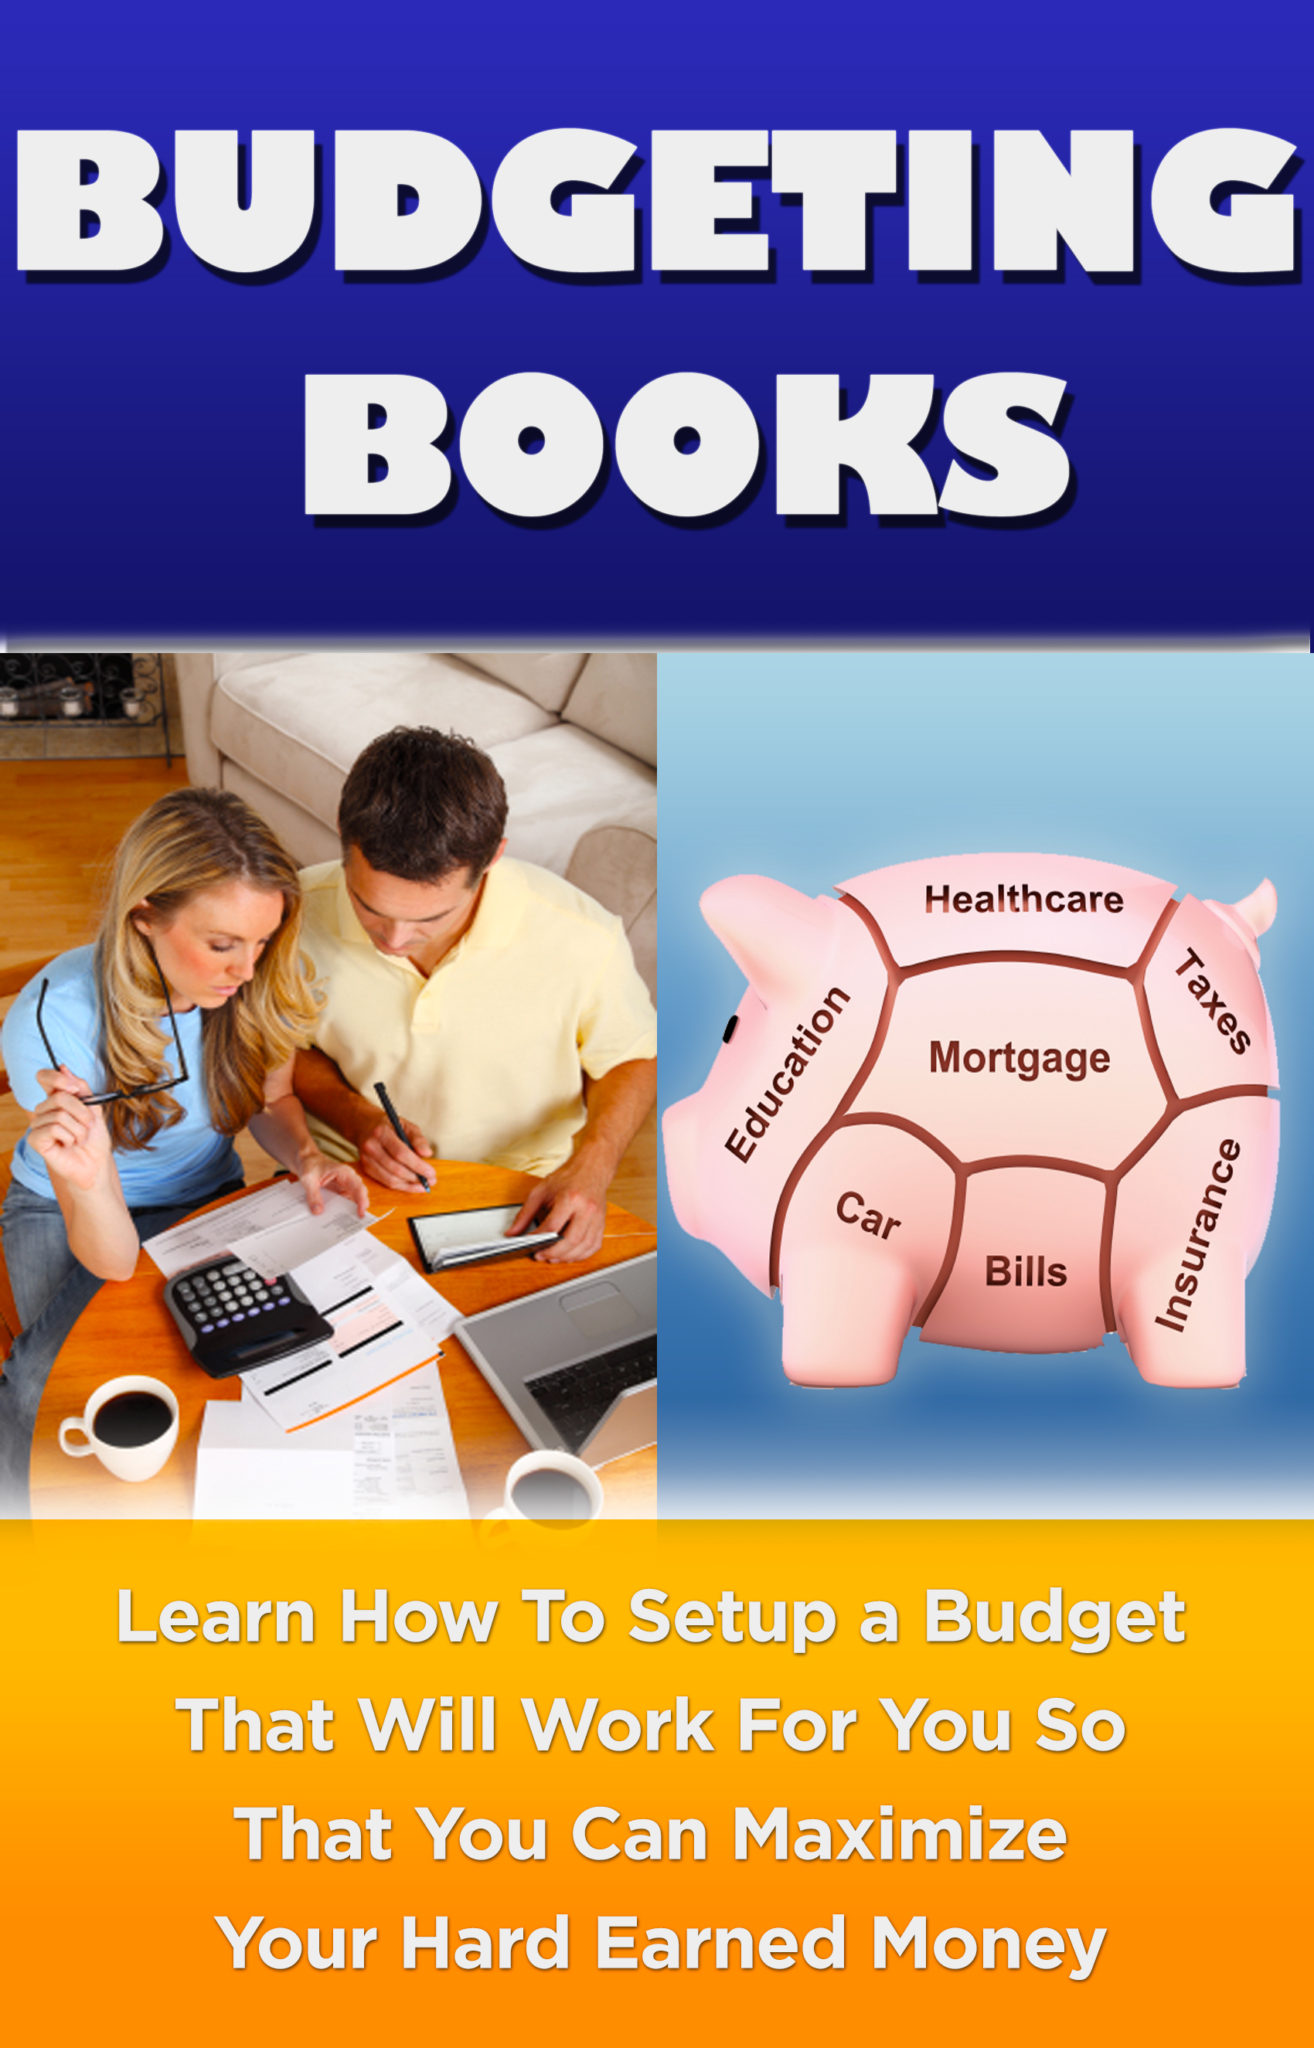 FREE: Budgeting Books: Learn How To Setup a Budget That Will Work For You So That You Can Maximize Your Hard Earned Money by Anthony Jose